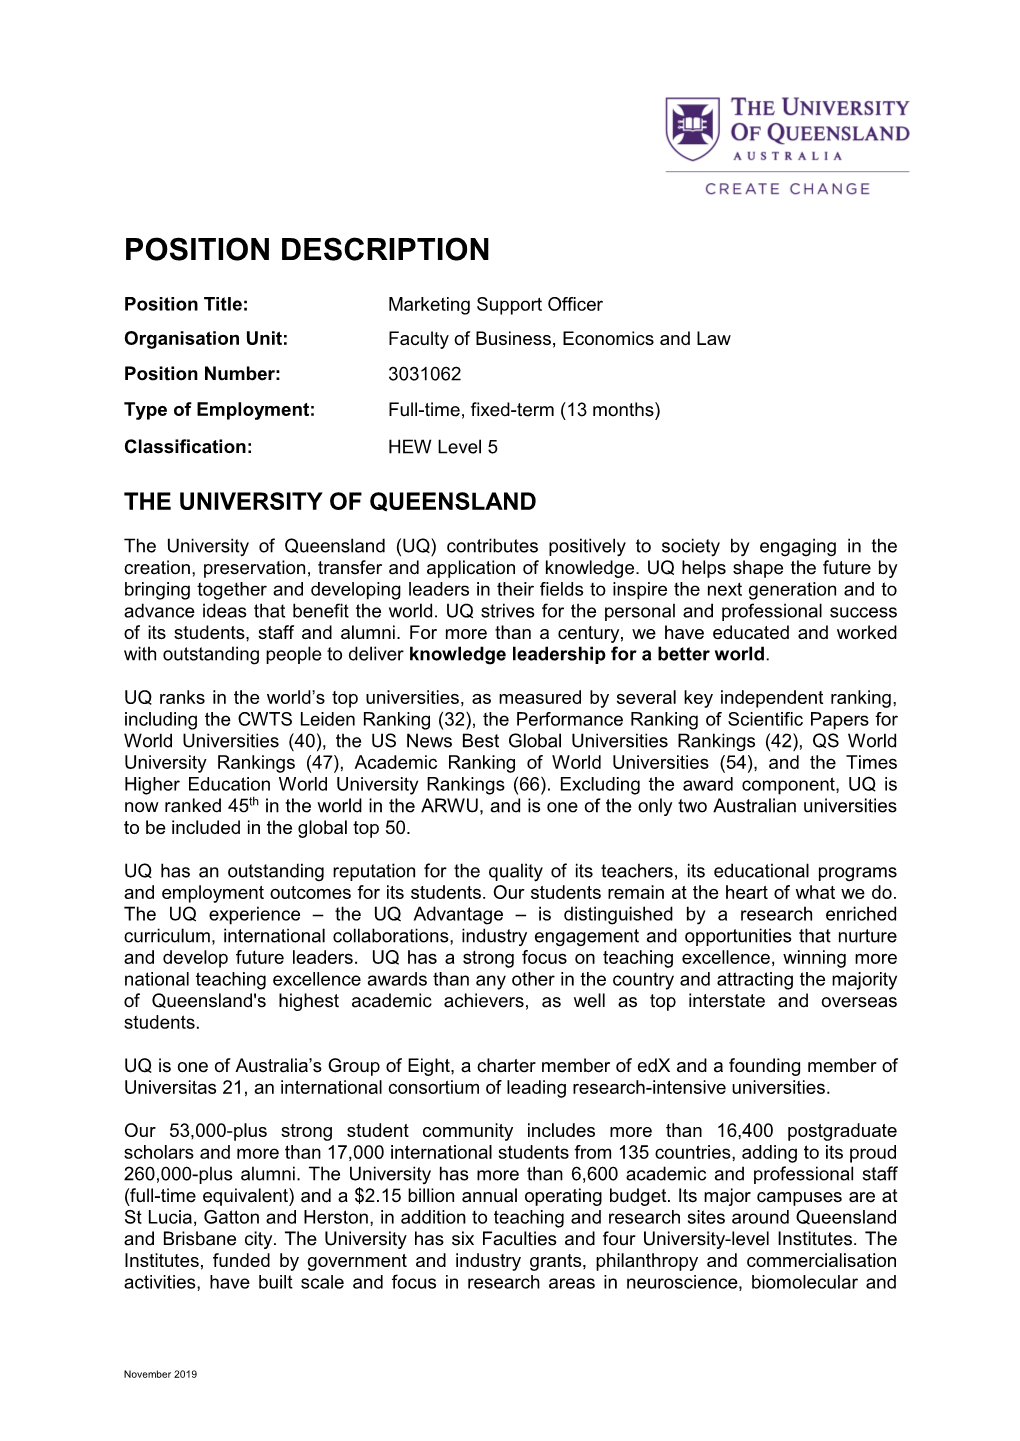 Instructions and Template for Creating a Position Description